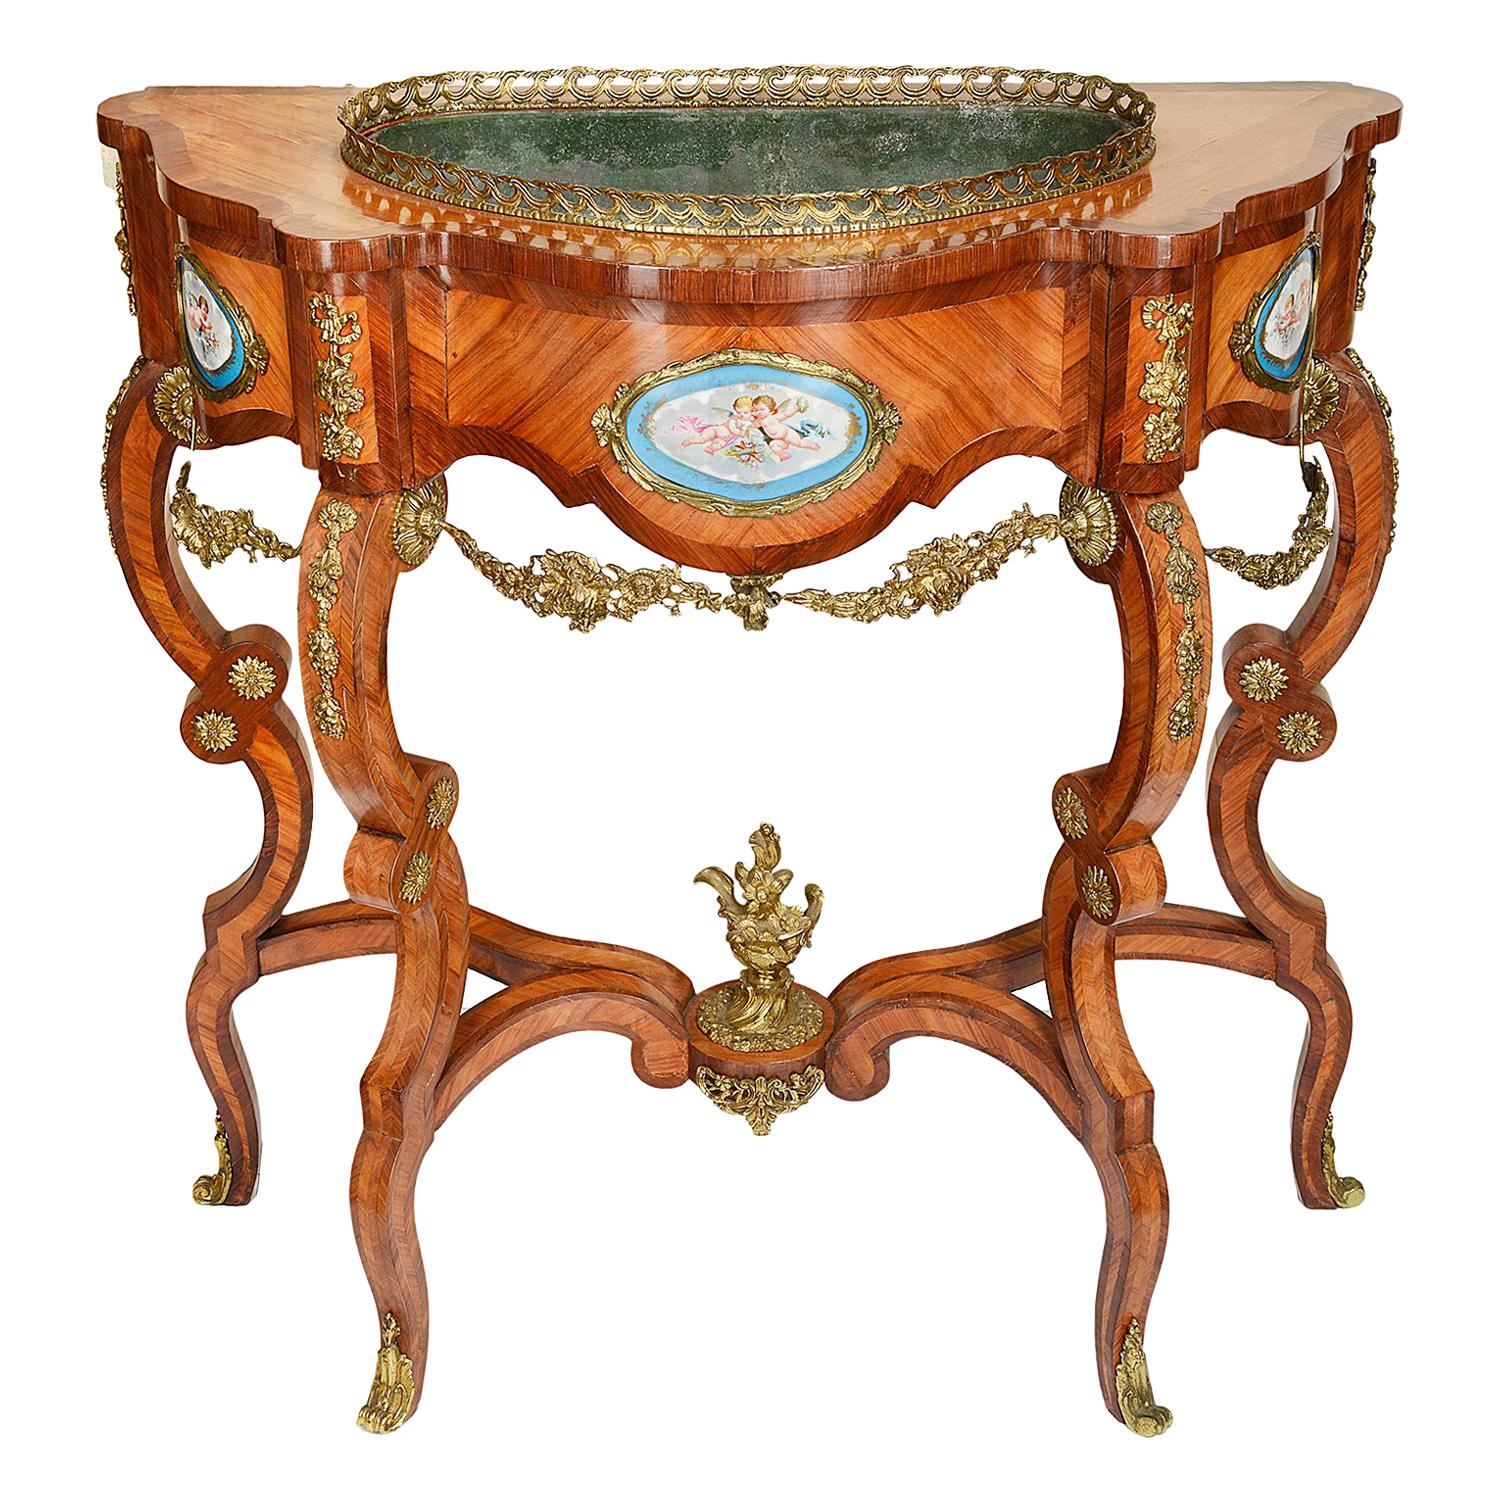 19th Century French Console Table or Jardinière